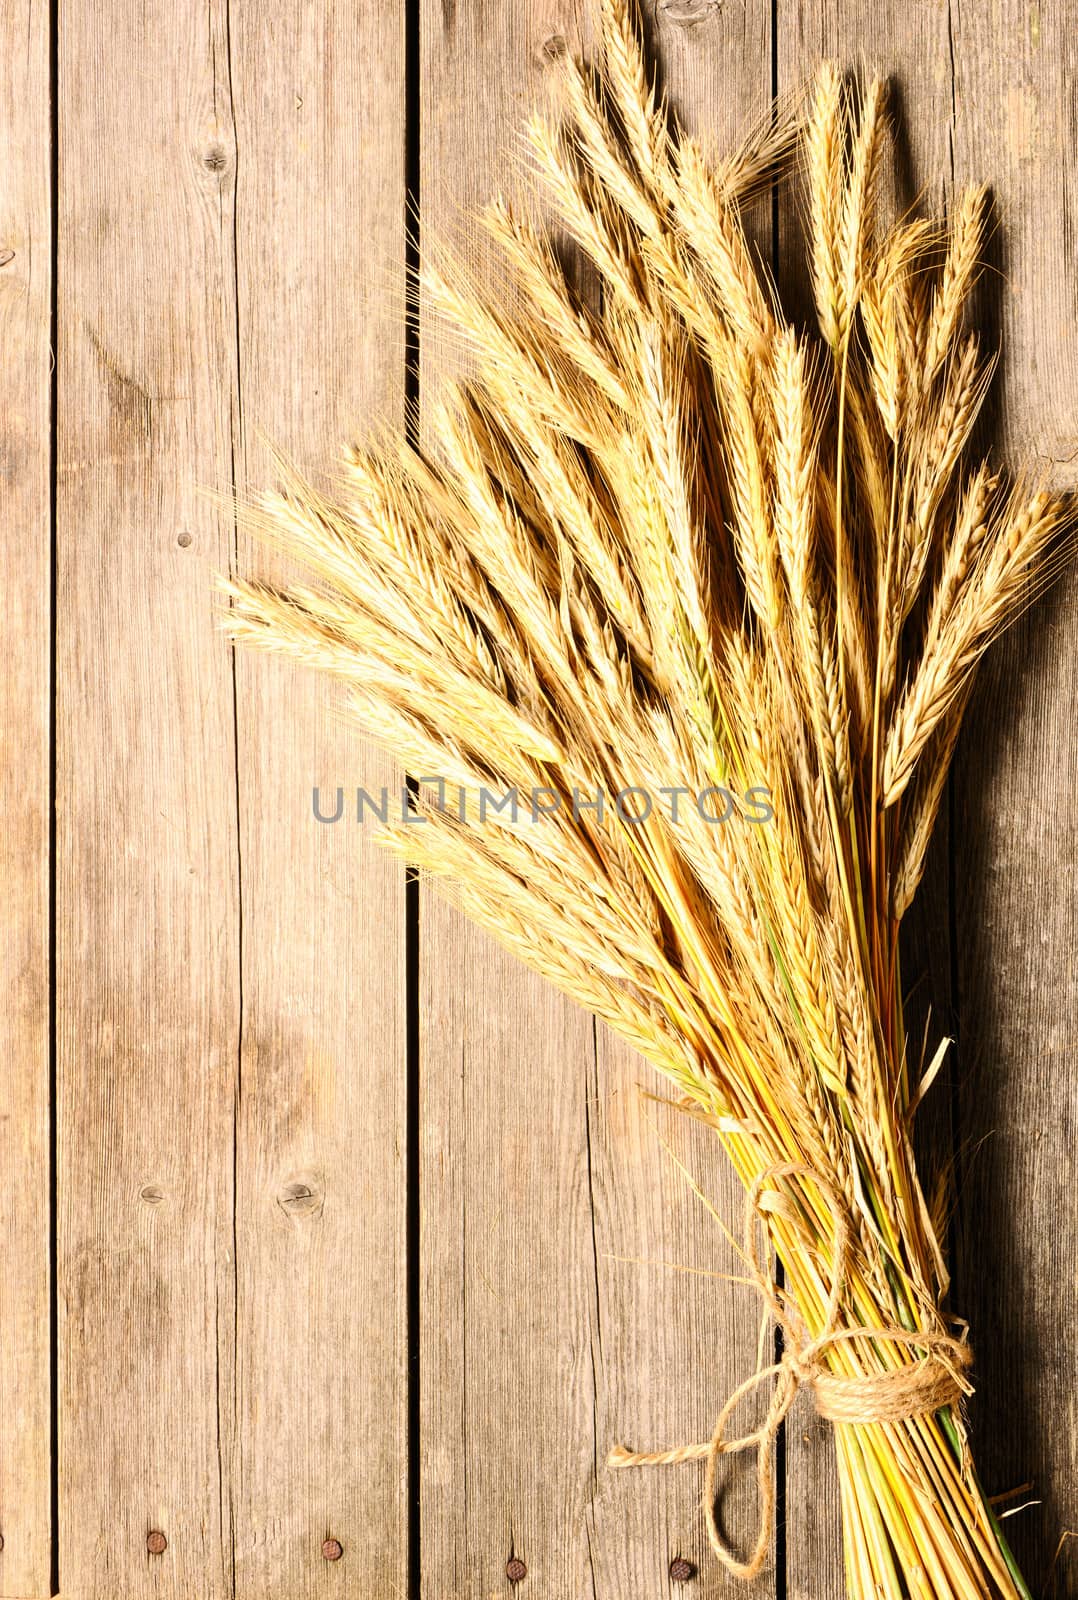 Rye spikelets over wooden background by haveseen